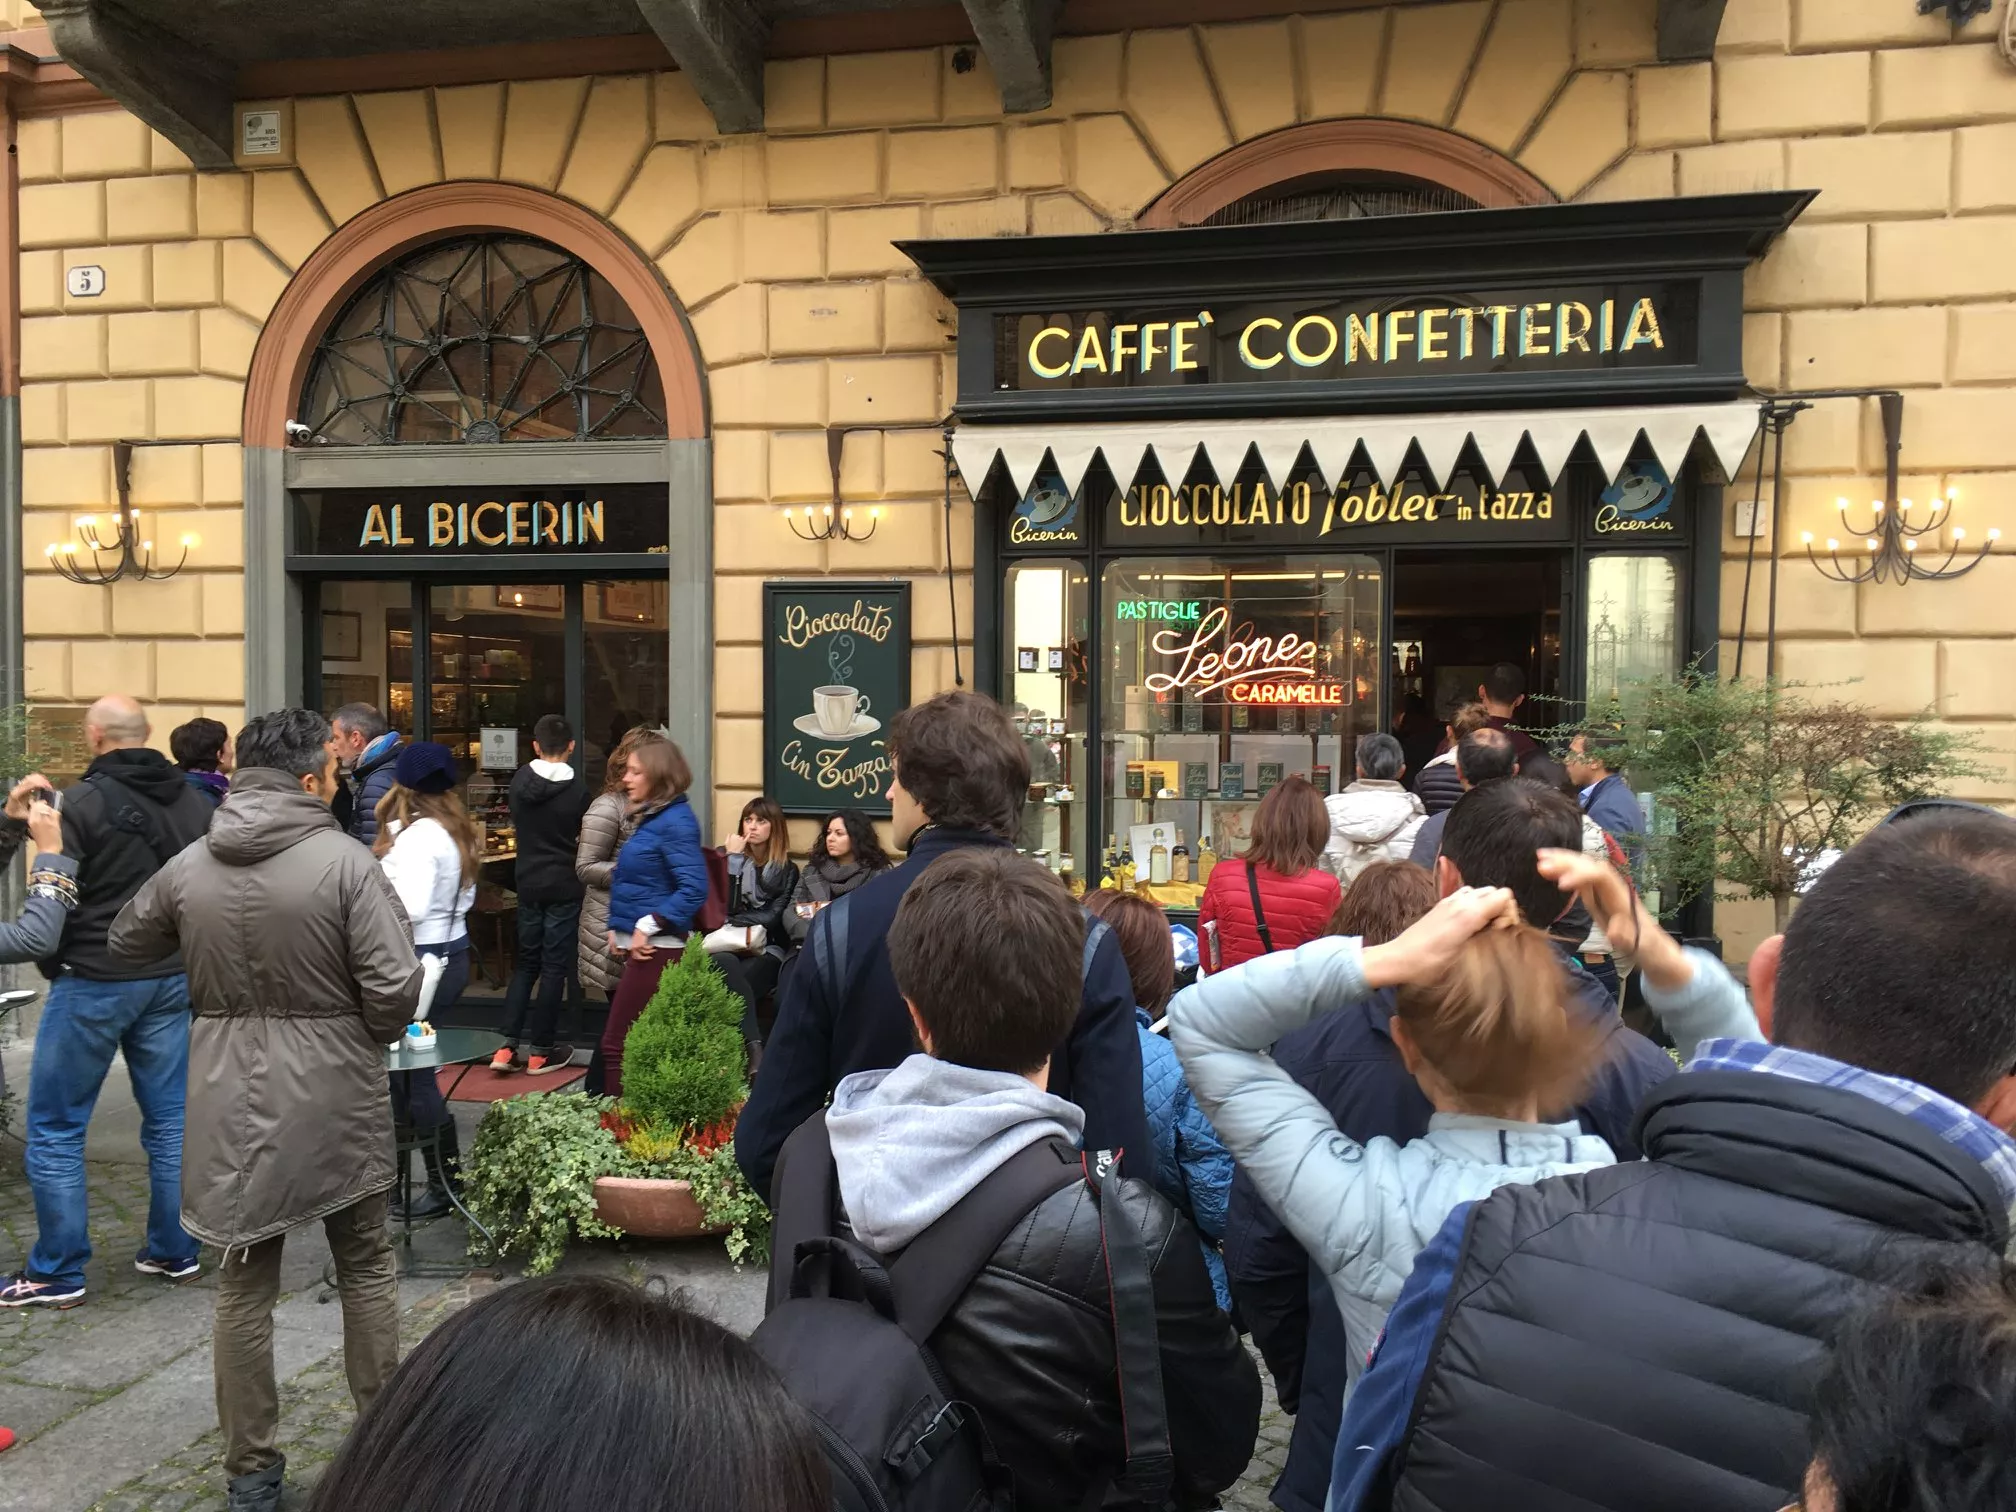 Cafe Al Bicerin in Italy, Europe | Cafes - Rated 3.7